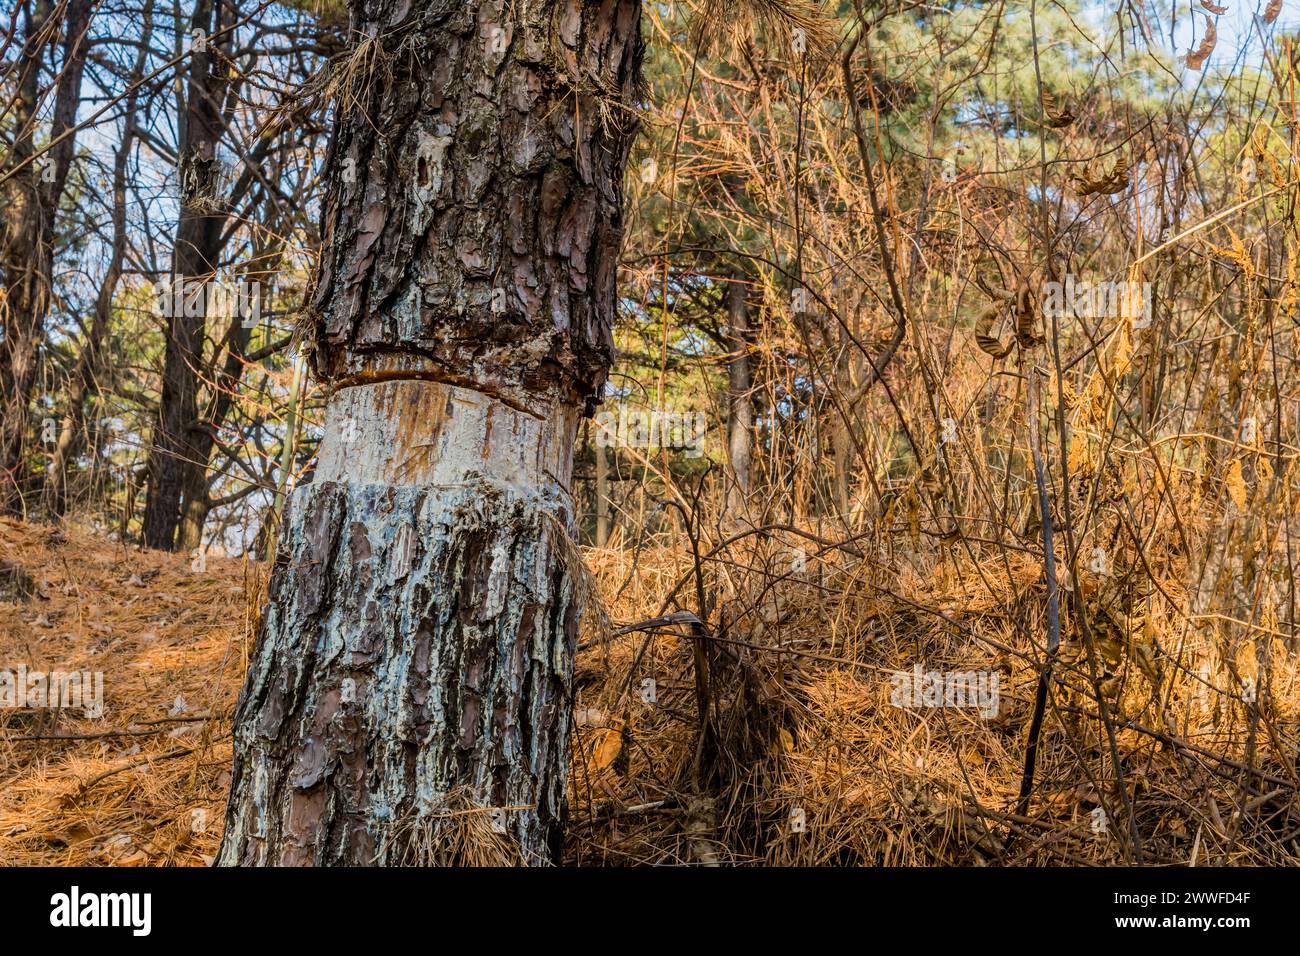 Pine tree trunk with peeling bark on a forest floor covered with pine needles, in South Korea Stock Photo